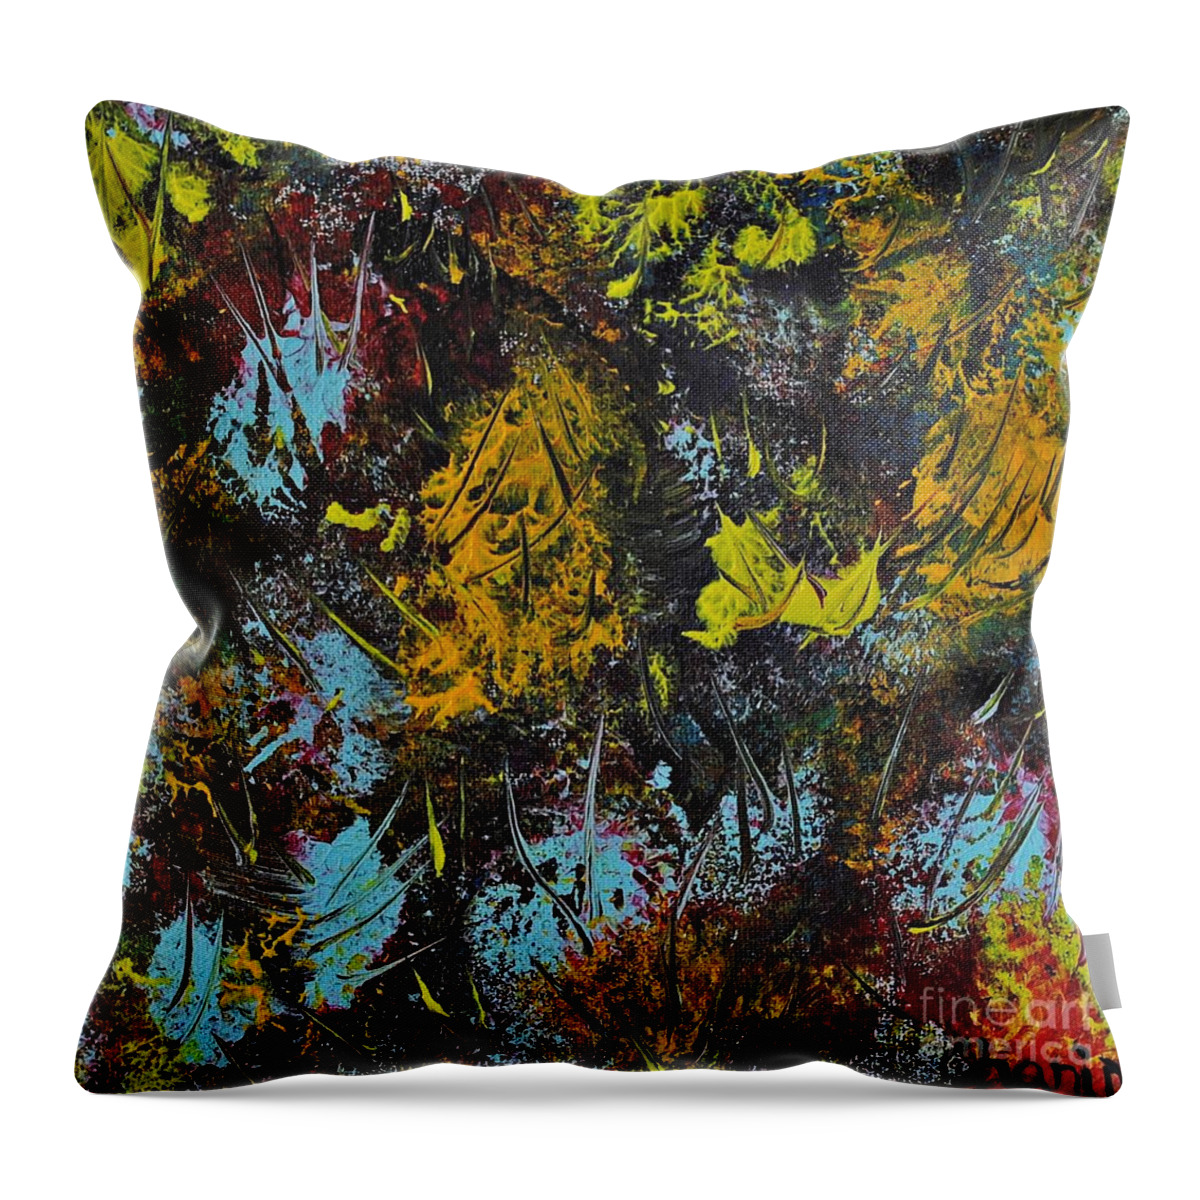 Abstract Throw Pillow featuring the painting Cacti by Chani Demuijlder